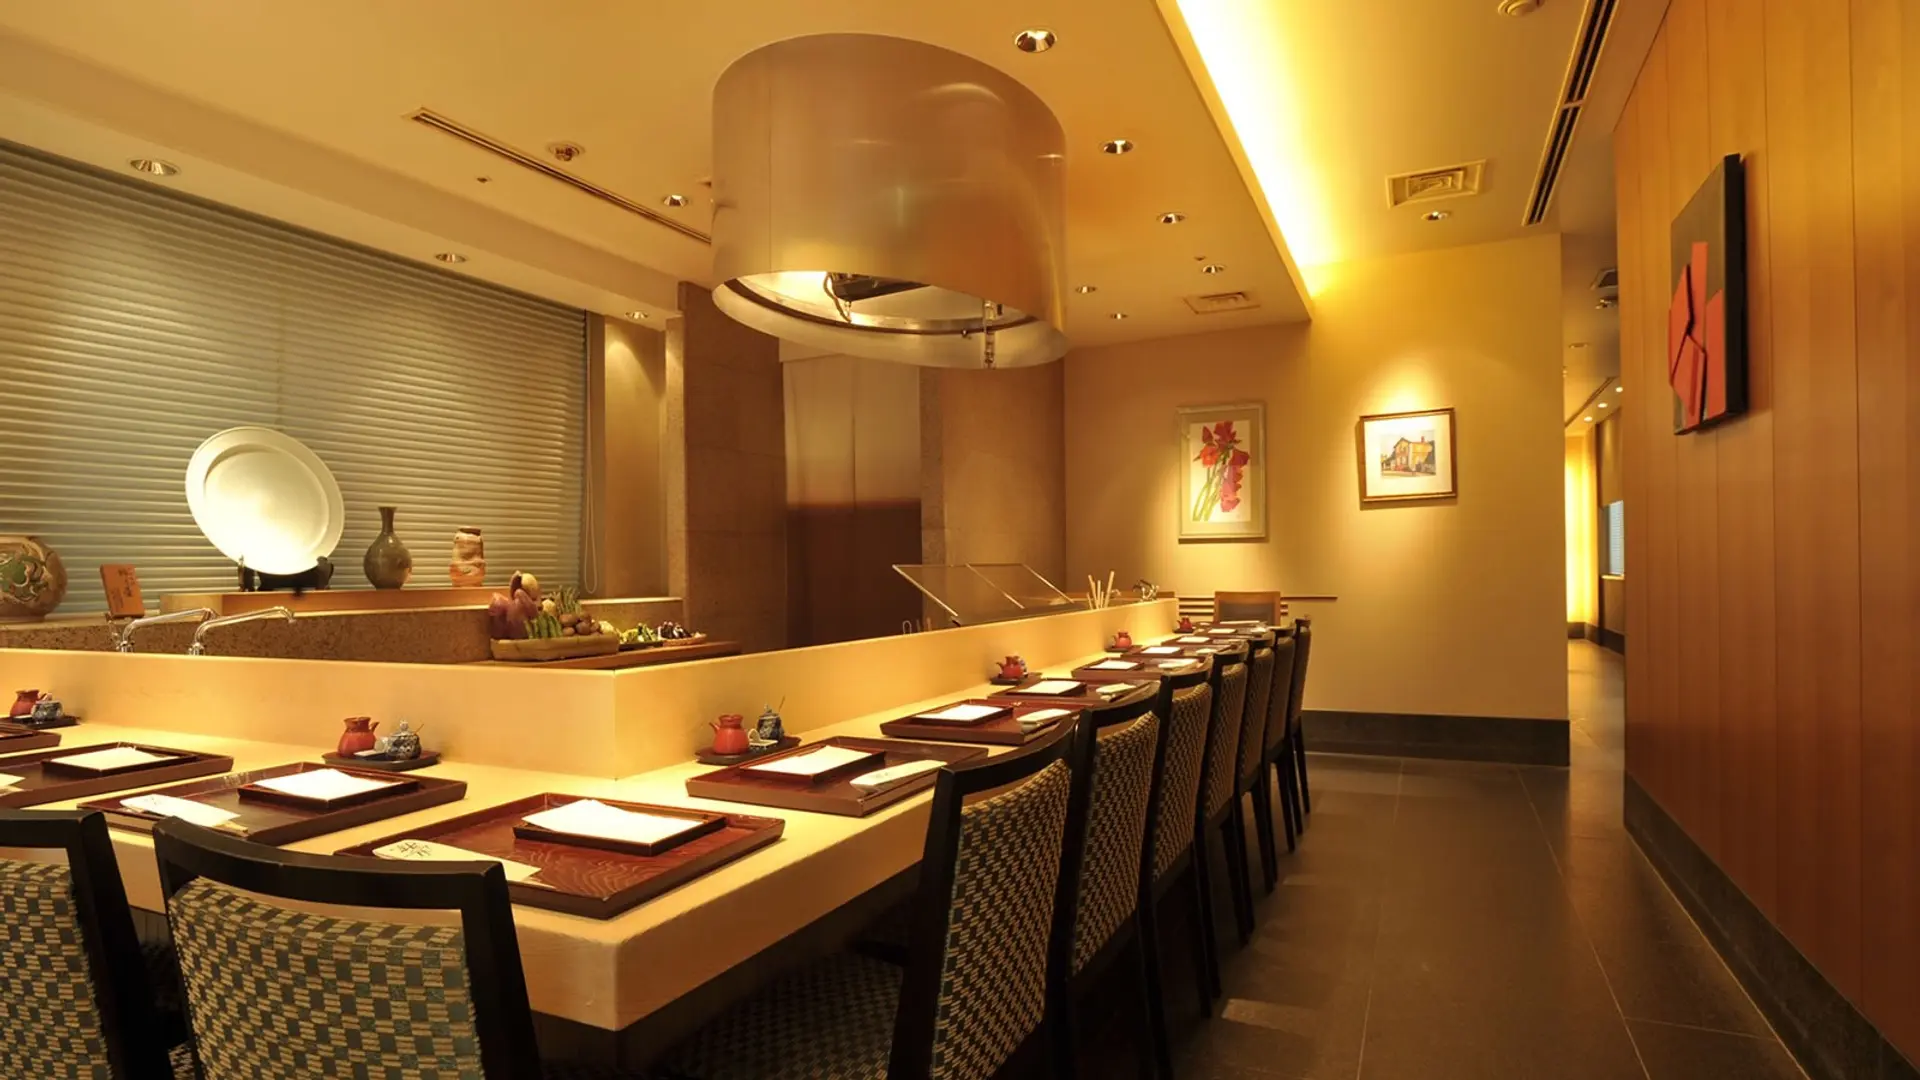 Dining area with patterned chairs, dark floor, yellow walls and roof at Kondo resturant in Tokyo.